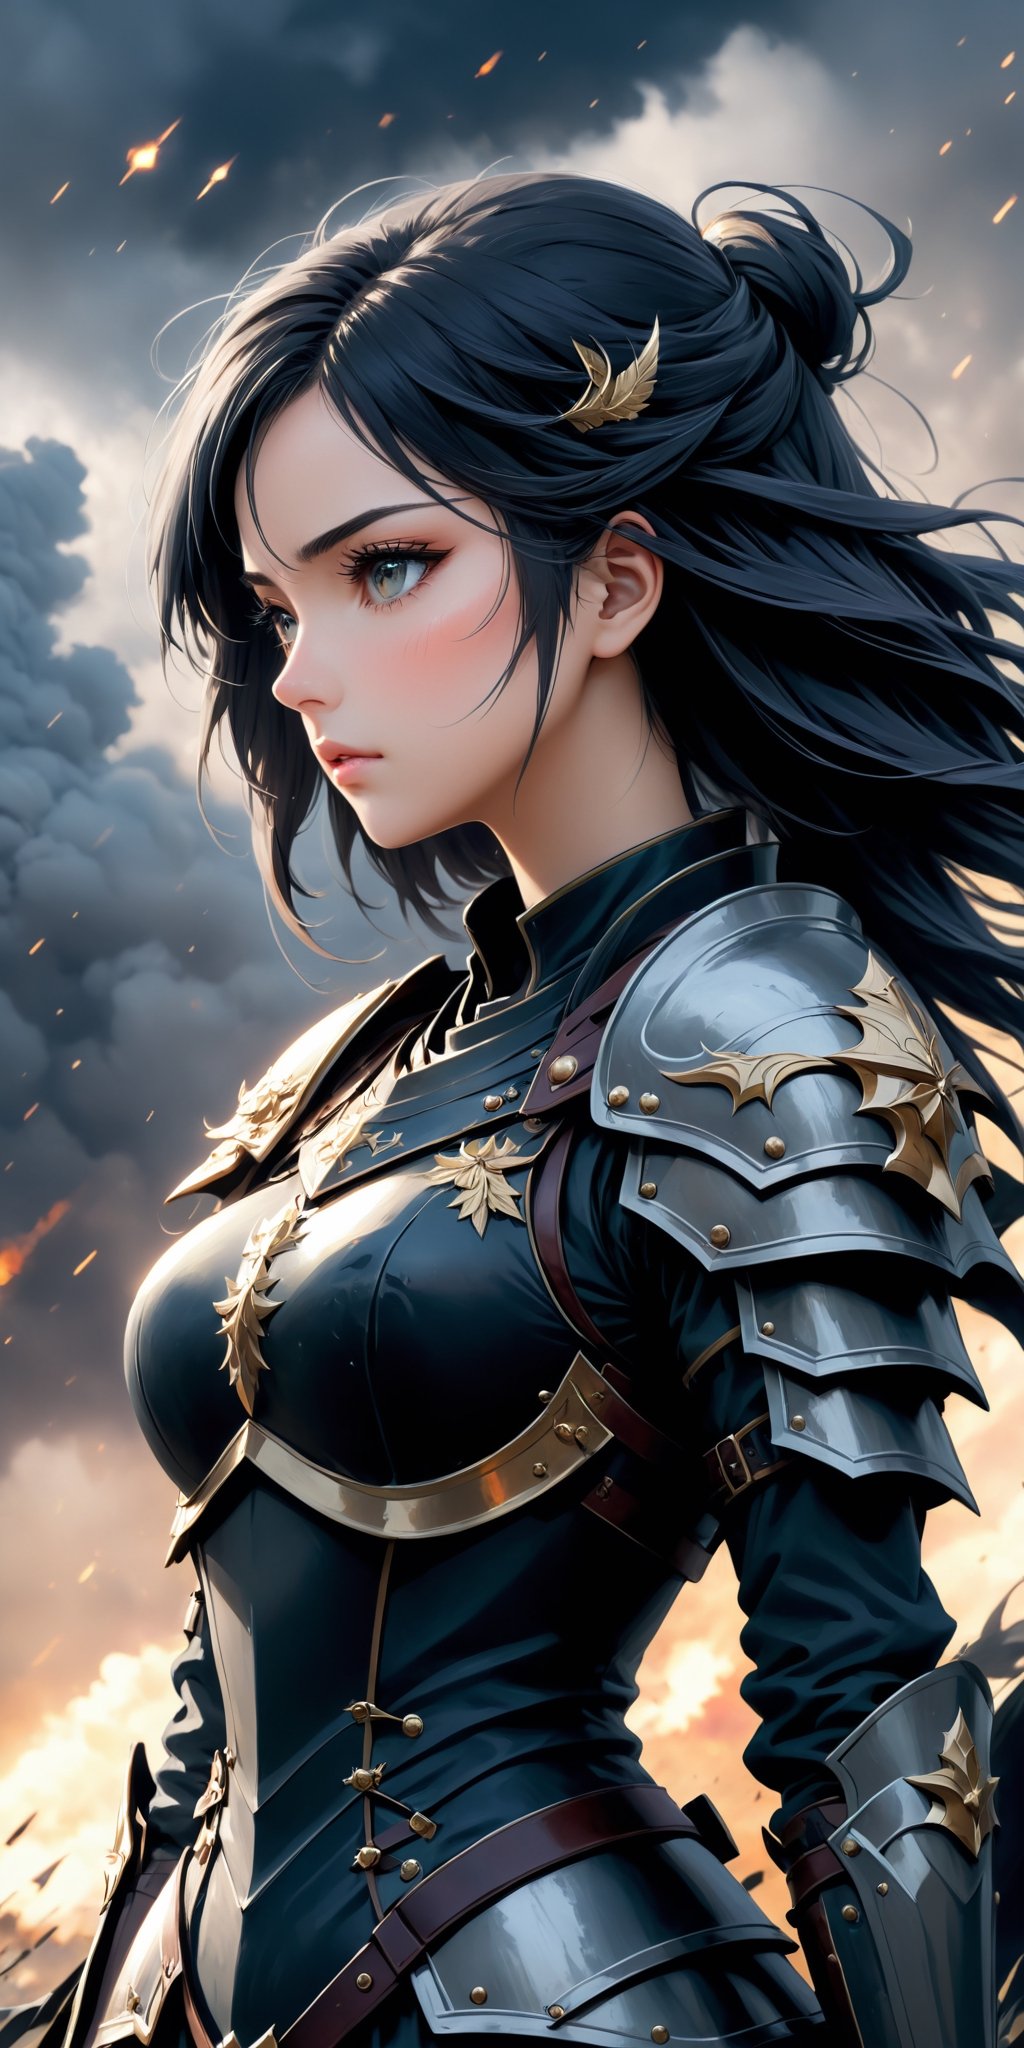 masterpiece, high_res, high quality, 
(side view:1.5), (full length view:1.5), epic fantasy illustration, merge detalization of manga style and realistic drawning of tradtiional arts, flat, dark colors palette, ink drawning, fiction,
incredibly beautiful and attractive woman weared armor, stands with her shoulders slumped, sad and exhausted, (very detailed outfit:1.3). (a woman must convey fragile beauty on whose shoulders lies the fate of the world and this oppresses her). the picture looks like a book cover. Use histories about feamle heroes. 
Surreal battlefield background, fusion cruelty of real war and symbolism of hero eposes, intricate and unexpected detailes. Dark and gothic. 
,(anime)